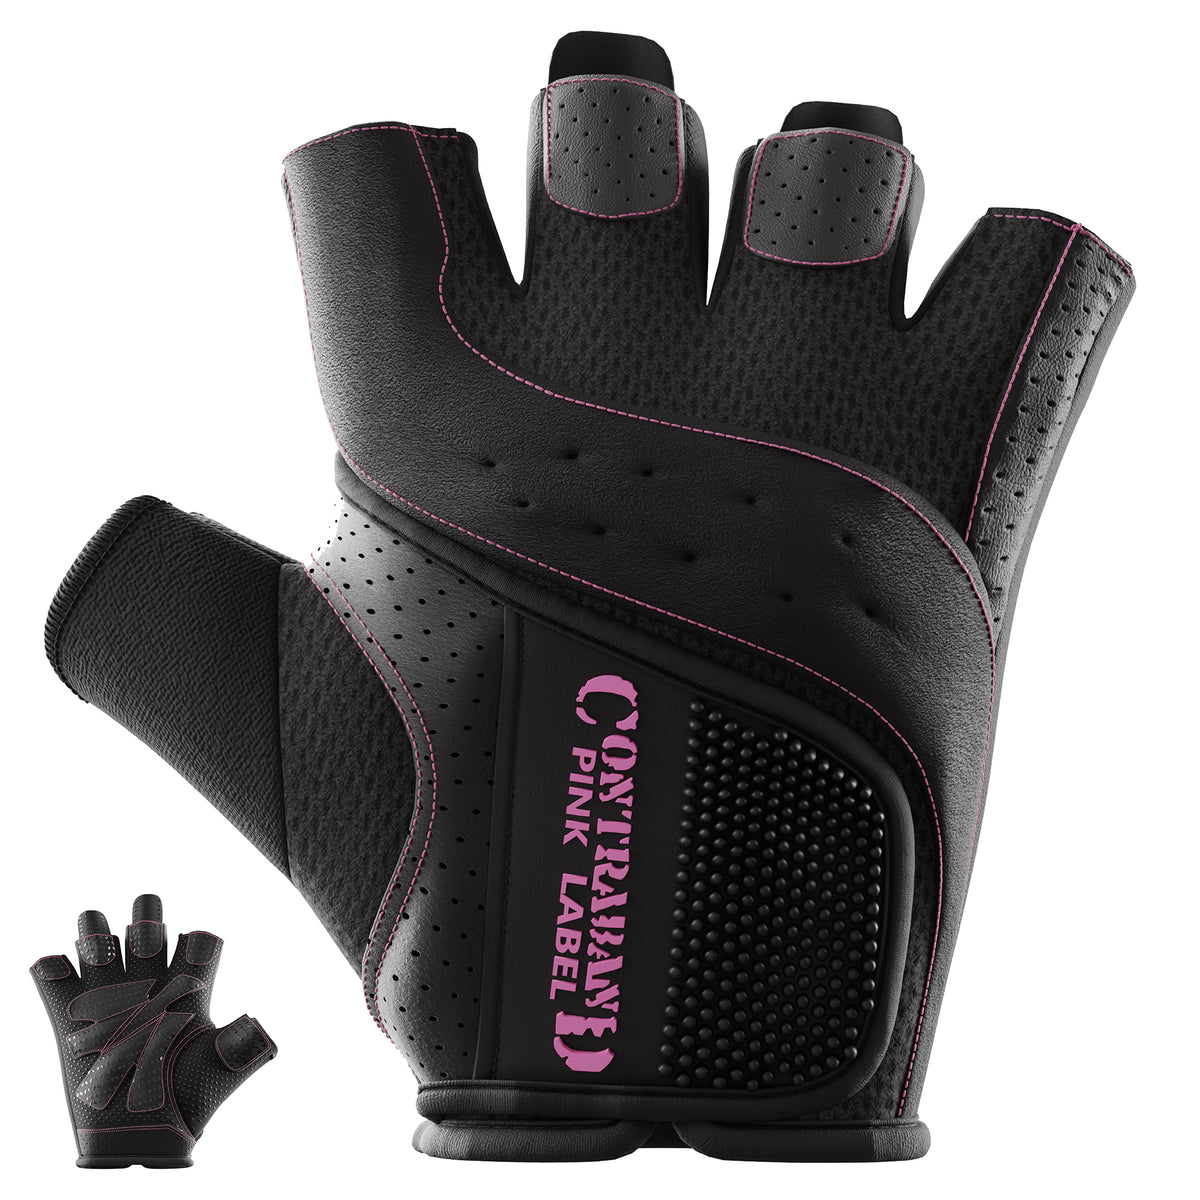 Contraband Pink Label 5137 Womens Padded Weight Lifting Gloves w/Grip-Lock Padding (Pair)